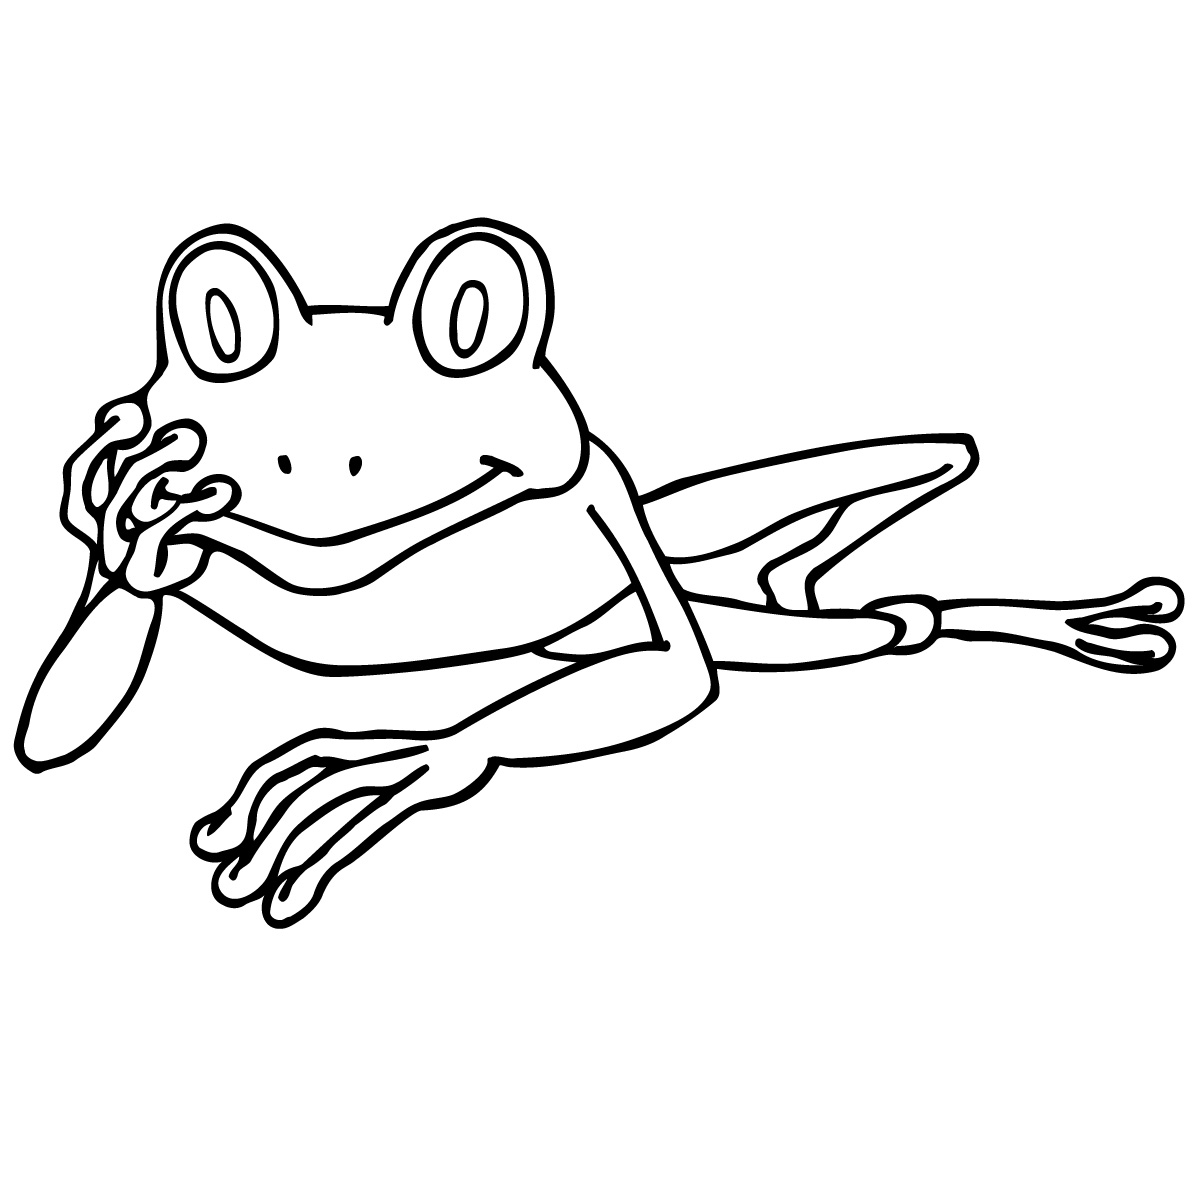 Tree Frog Clip Art Black And White | Clipart Panda - Free Clipart ...